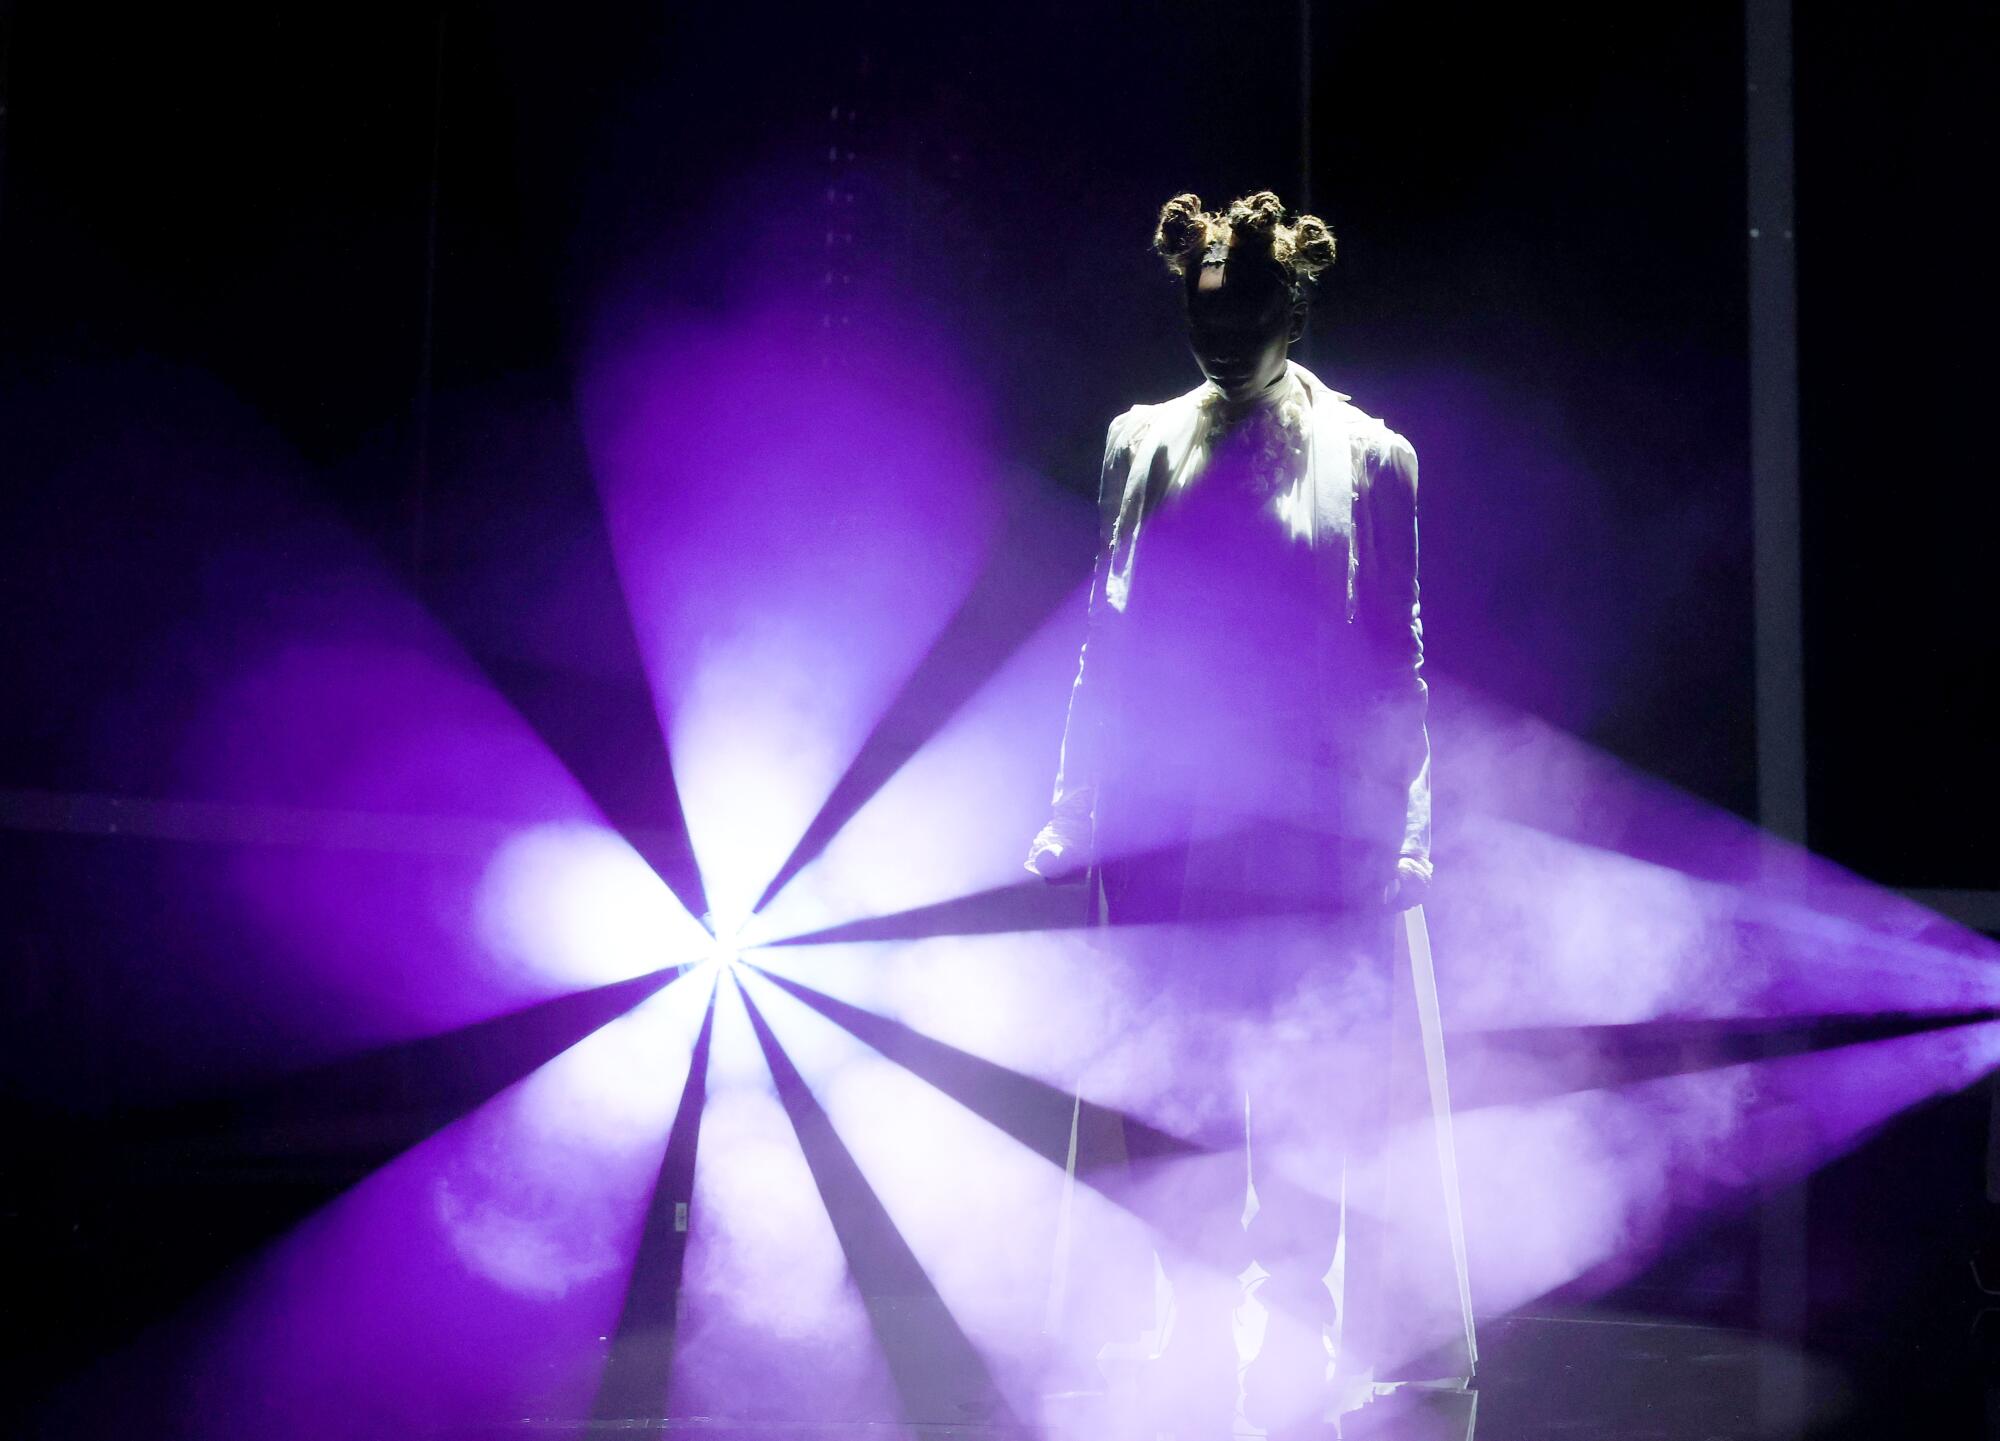 Brandy is silhouetted in a purple spotlight on stage.